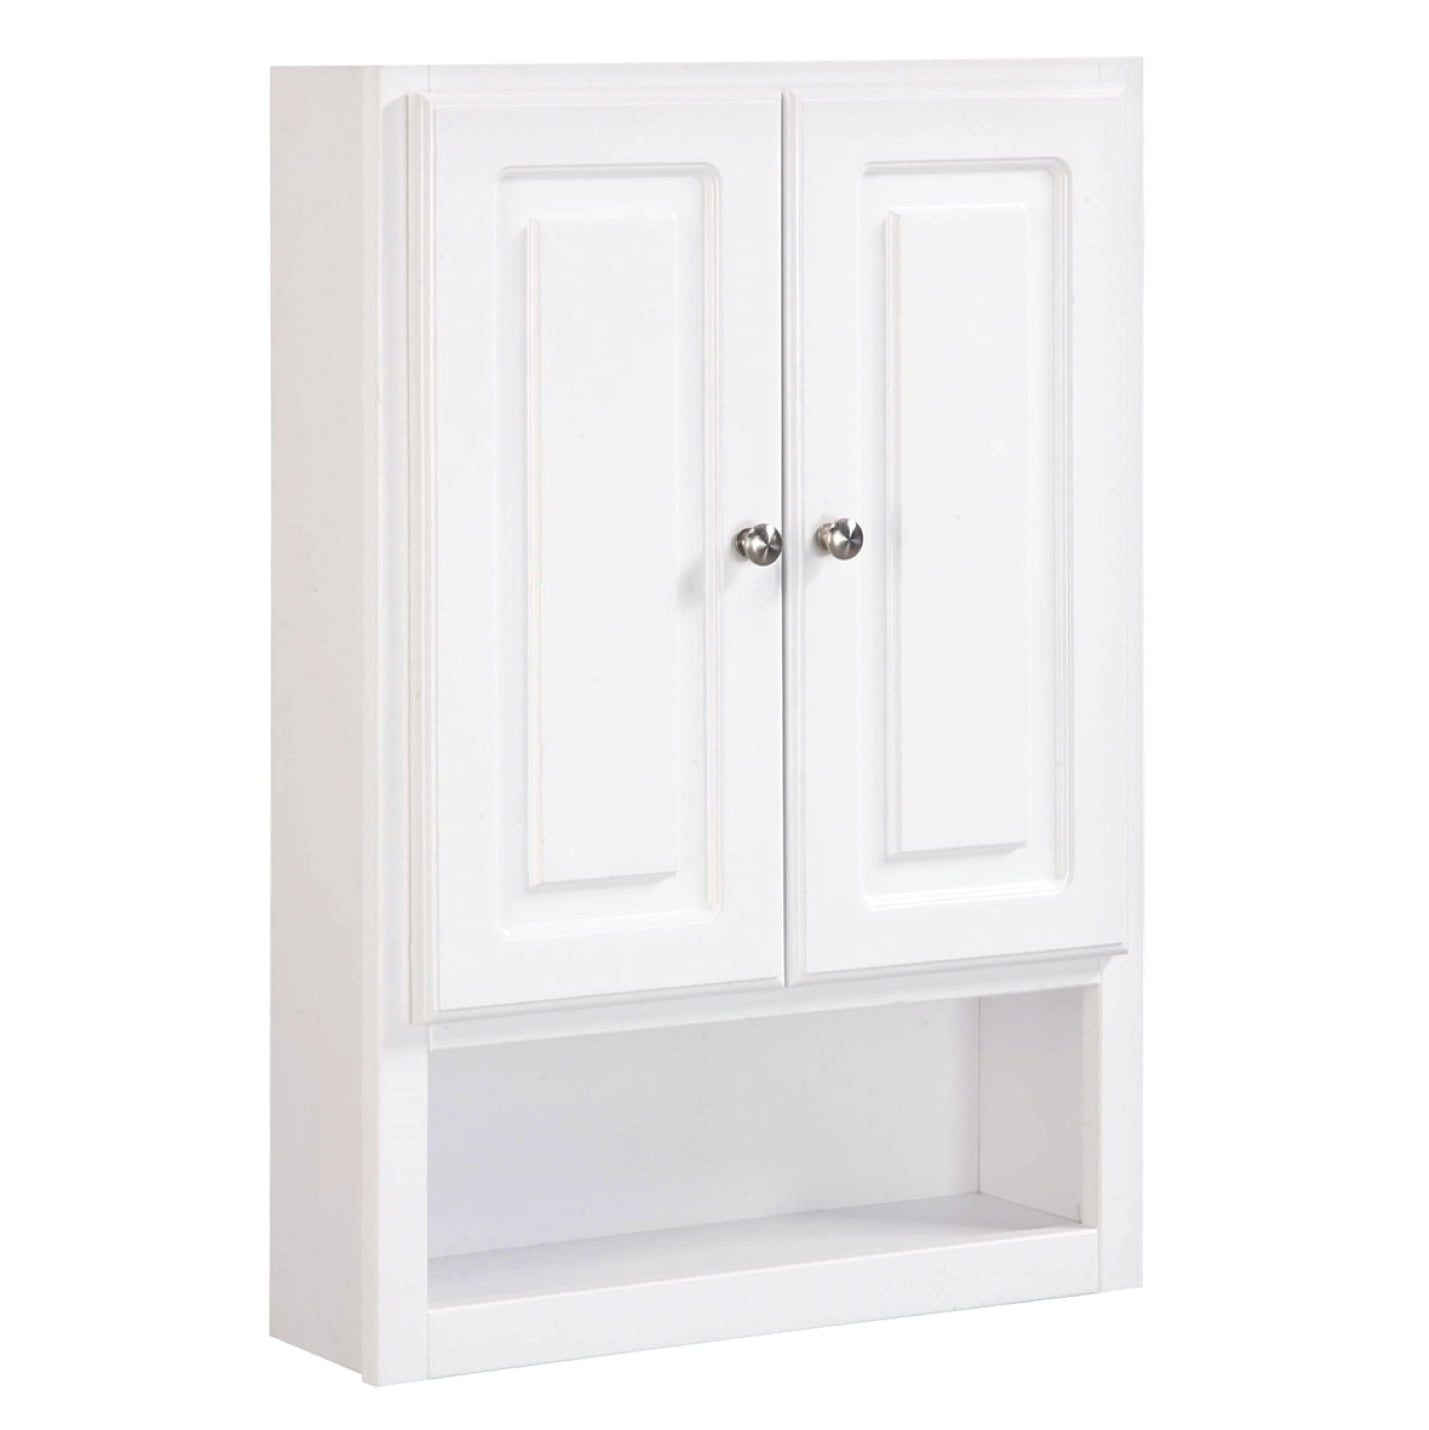 Wooden Cabinet Cupboard Floor Standing Cabinet Unit Storage with 2 Drawers and 2 Doors for Home Office White 73.5 × 66 × 33 cm